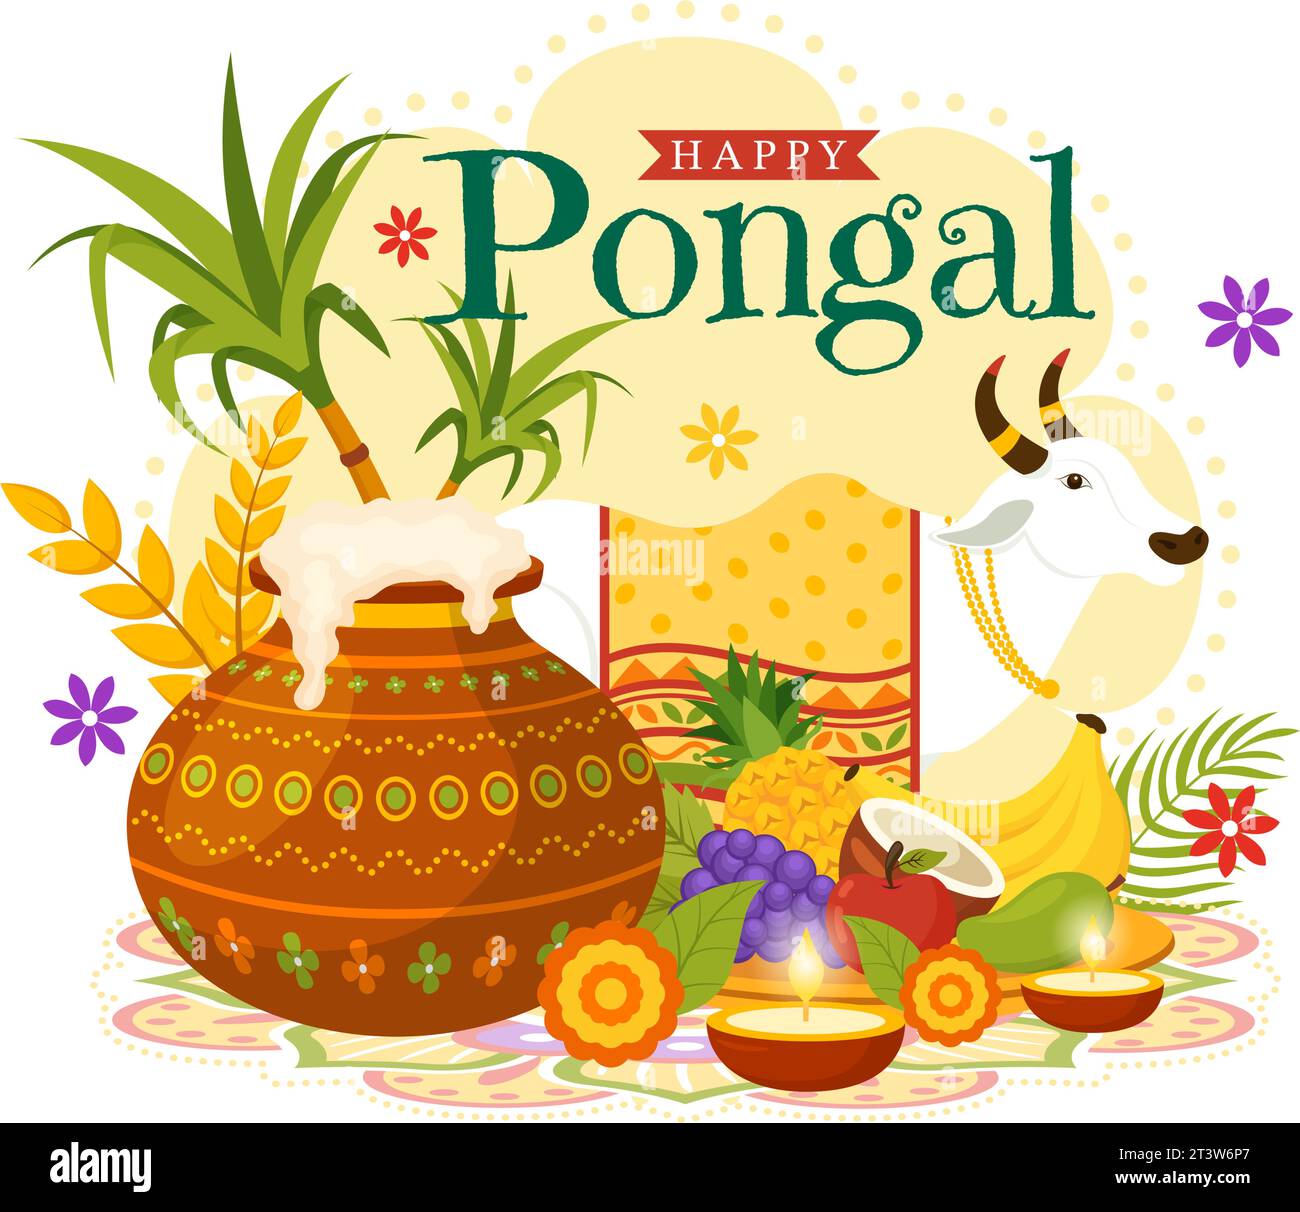 Happy Pongal Vector Illustration of Traditional Tamil Nadu India Festival Celebration with Sugarcane and Plate of Religious Props in Flat background Illustrazione Vettoriale